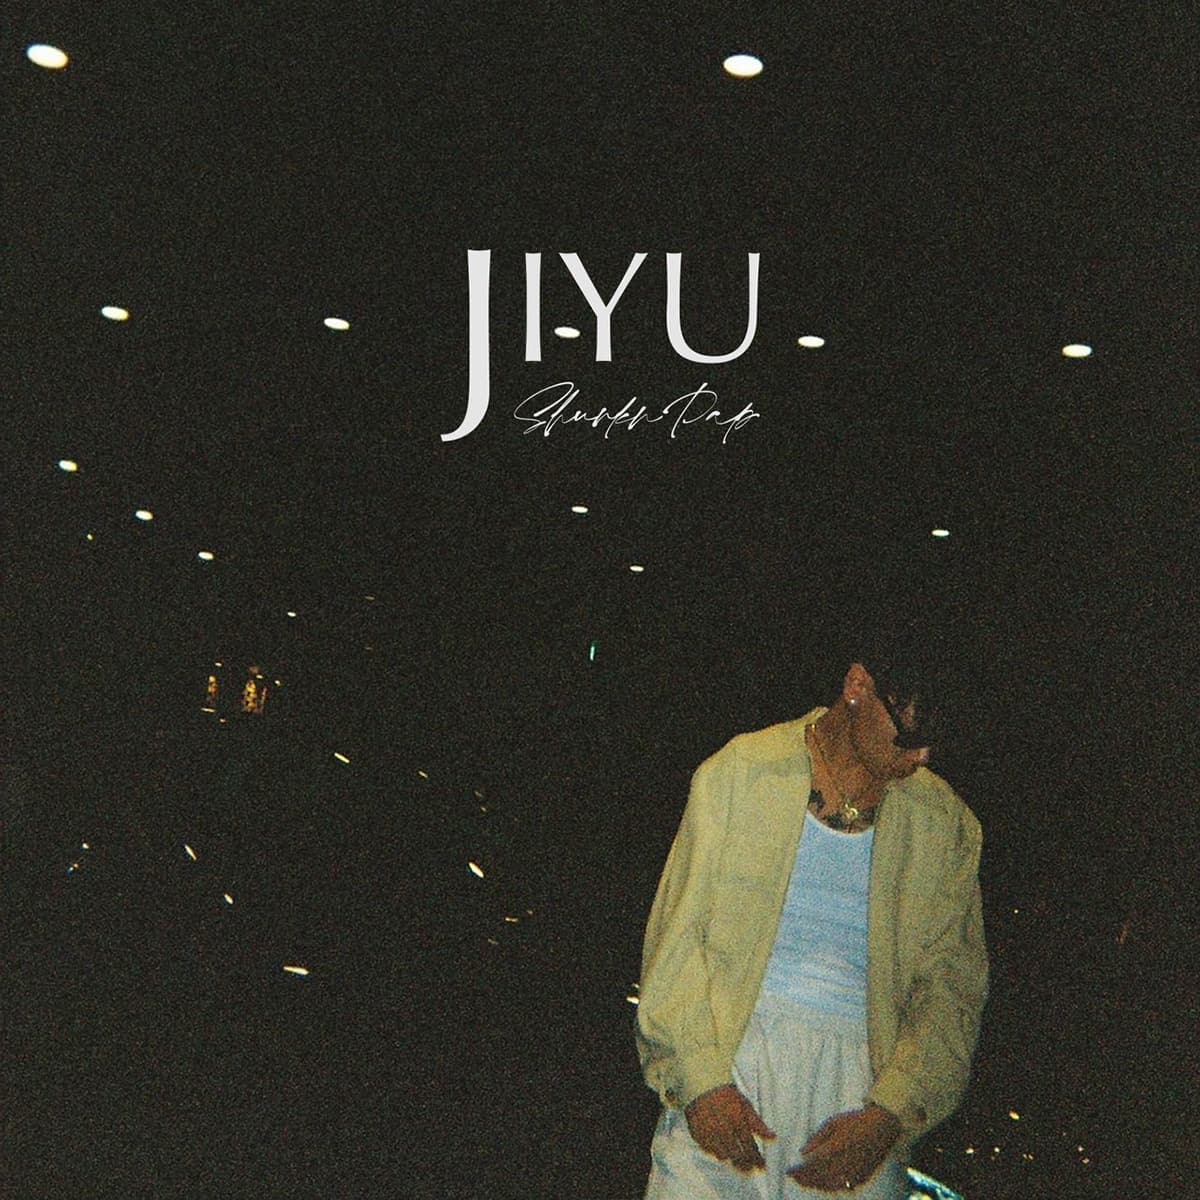 Shurkn Pap will release his new album "JIYU" on September 29th, which is packed with collaborative songs with various Asian artists such as Ryohu and tlinh (Vietnam)!